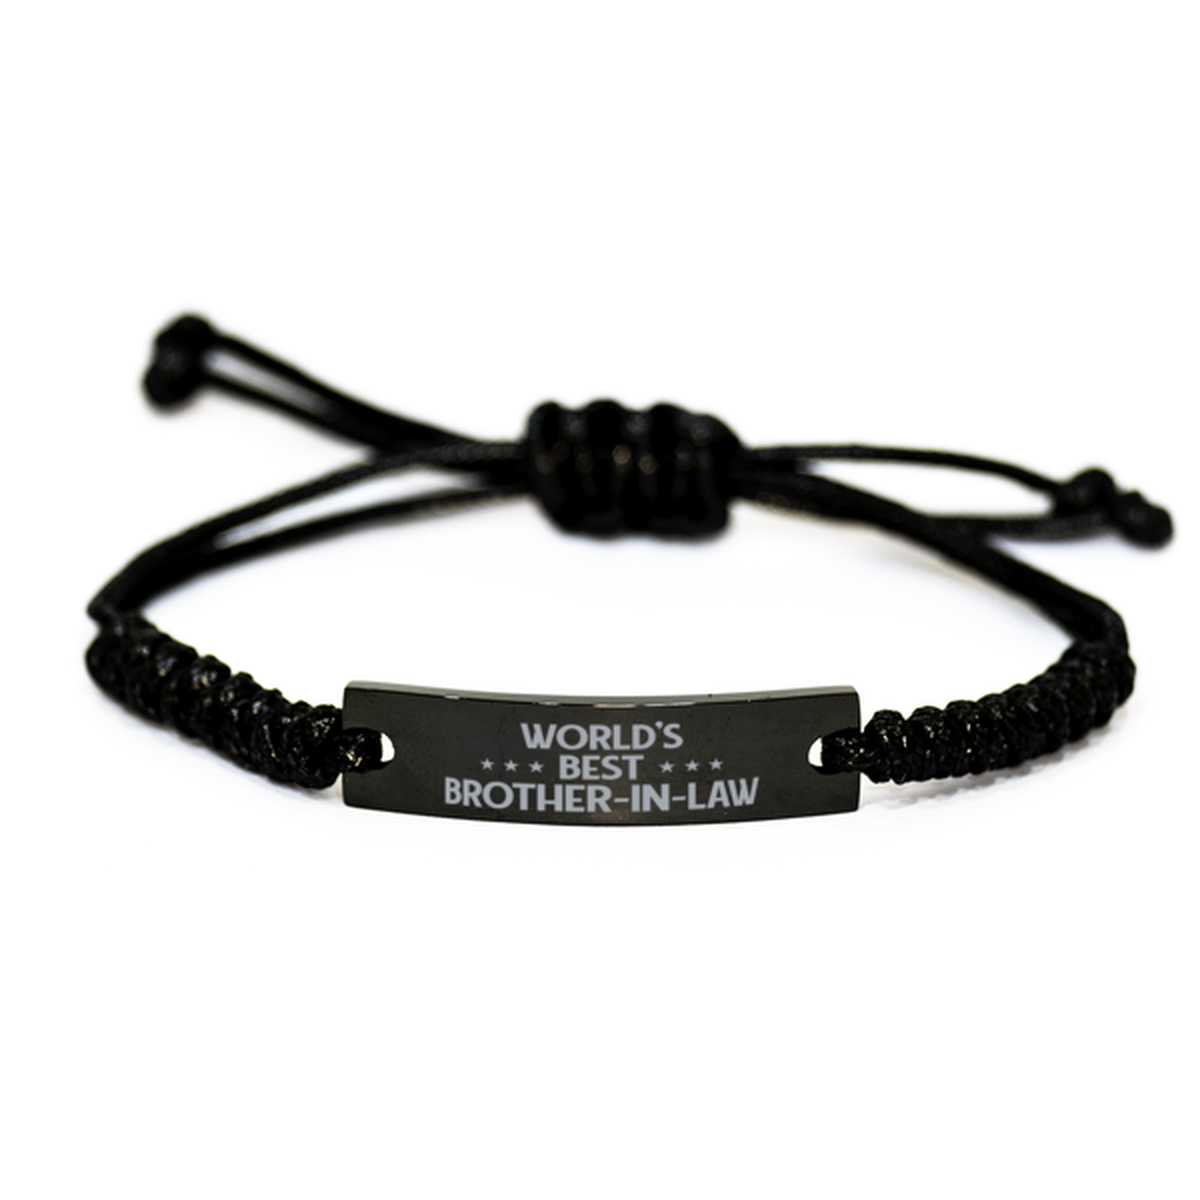 World's Best Brother-in-law Gifts, Funny Engraved Rope Bracelet For Brother-in-law, Birthday Family Gifts For Men